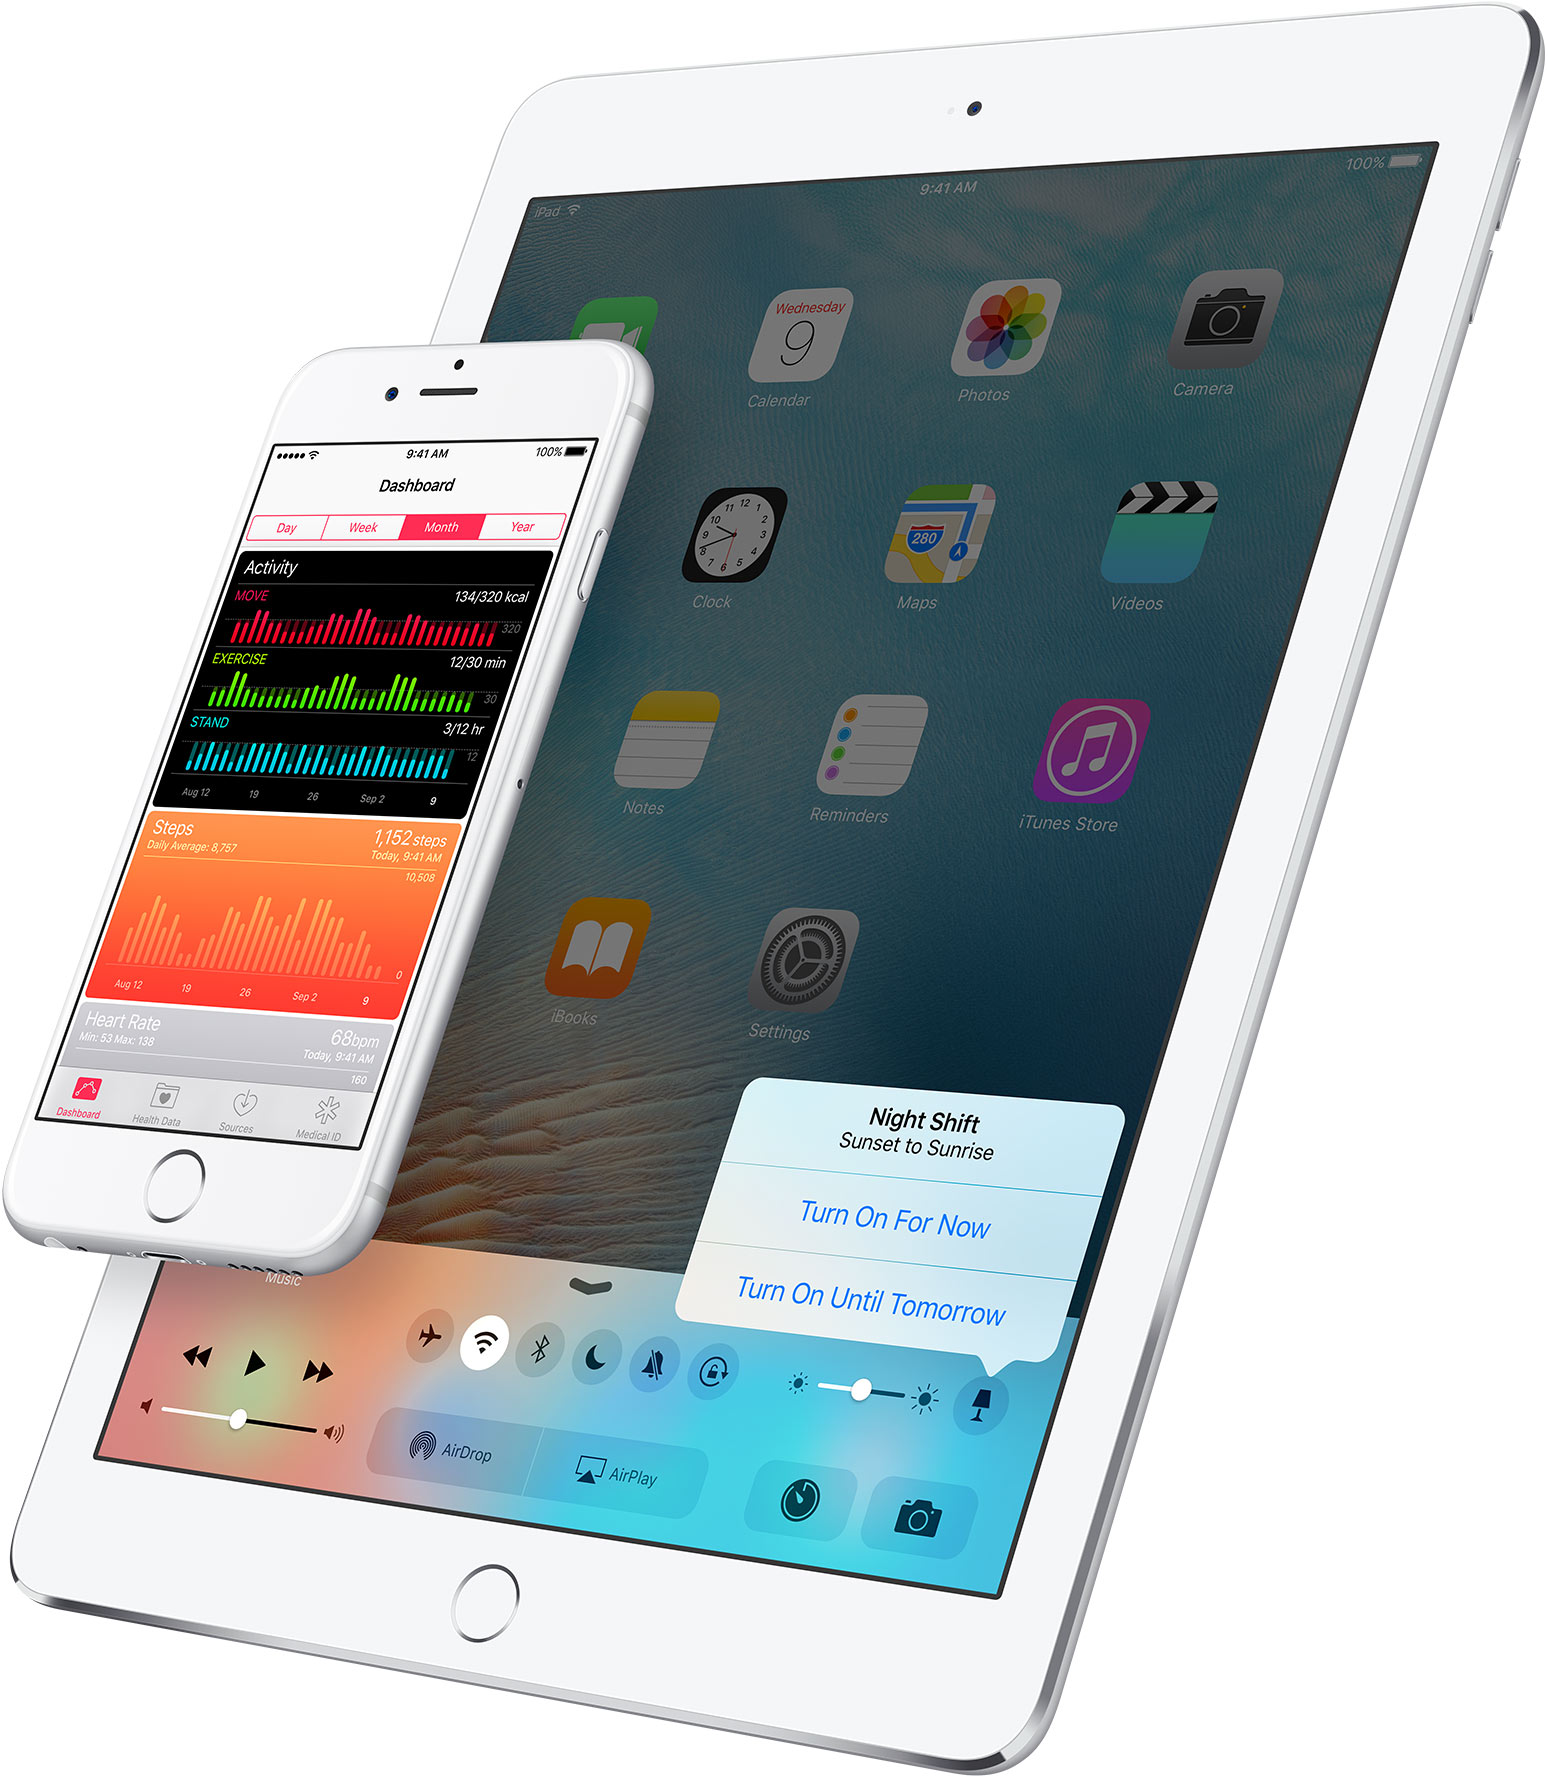 This Is How You Will Use 'Night Shift' On The iPhone and iPad